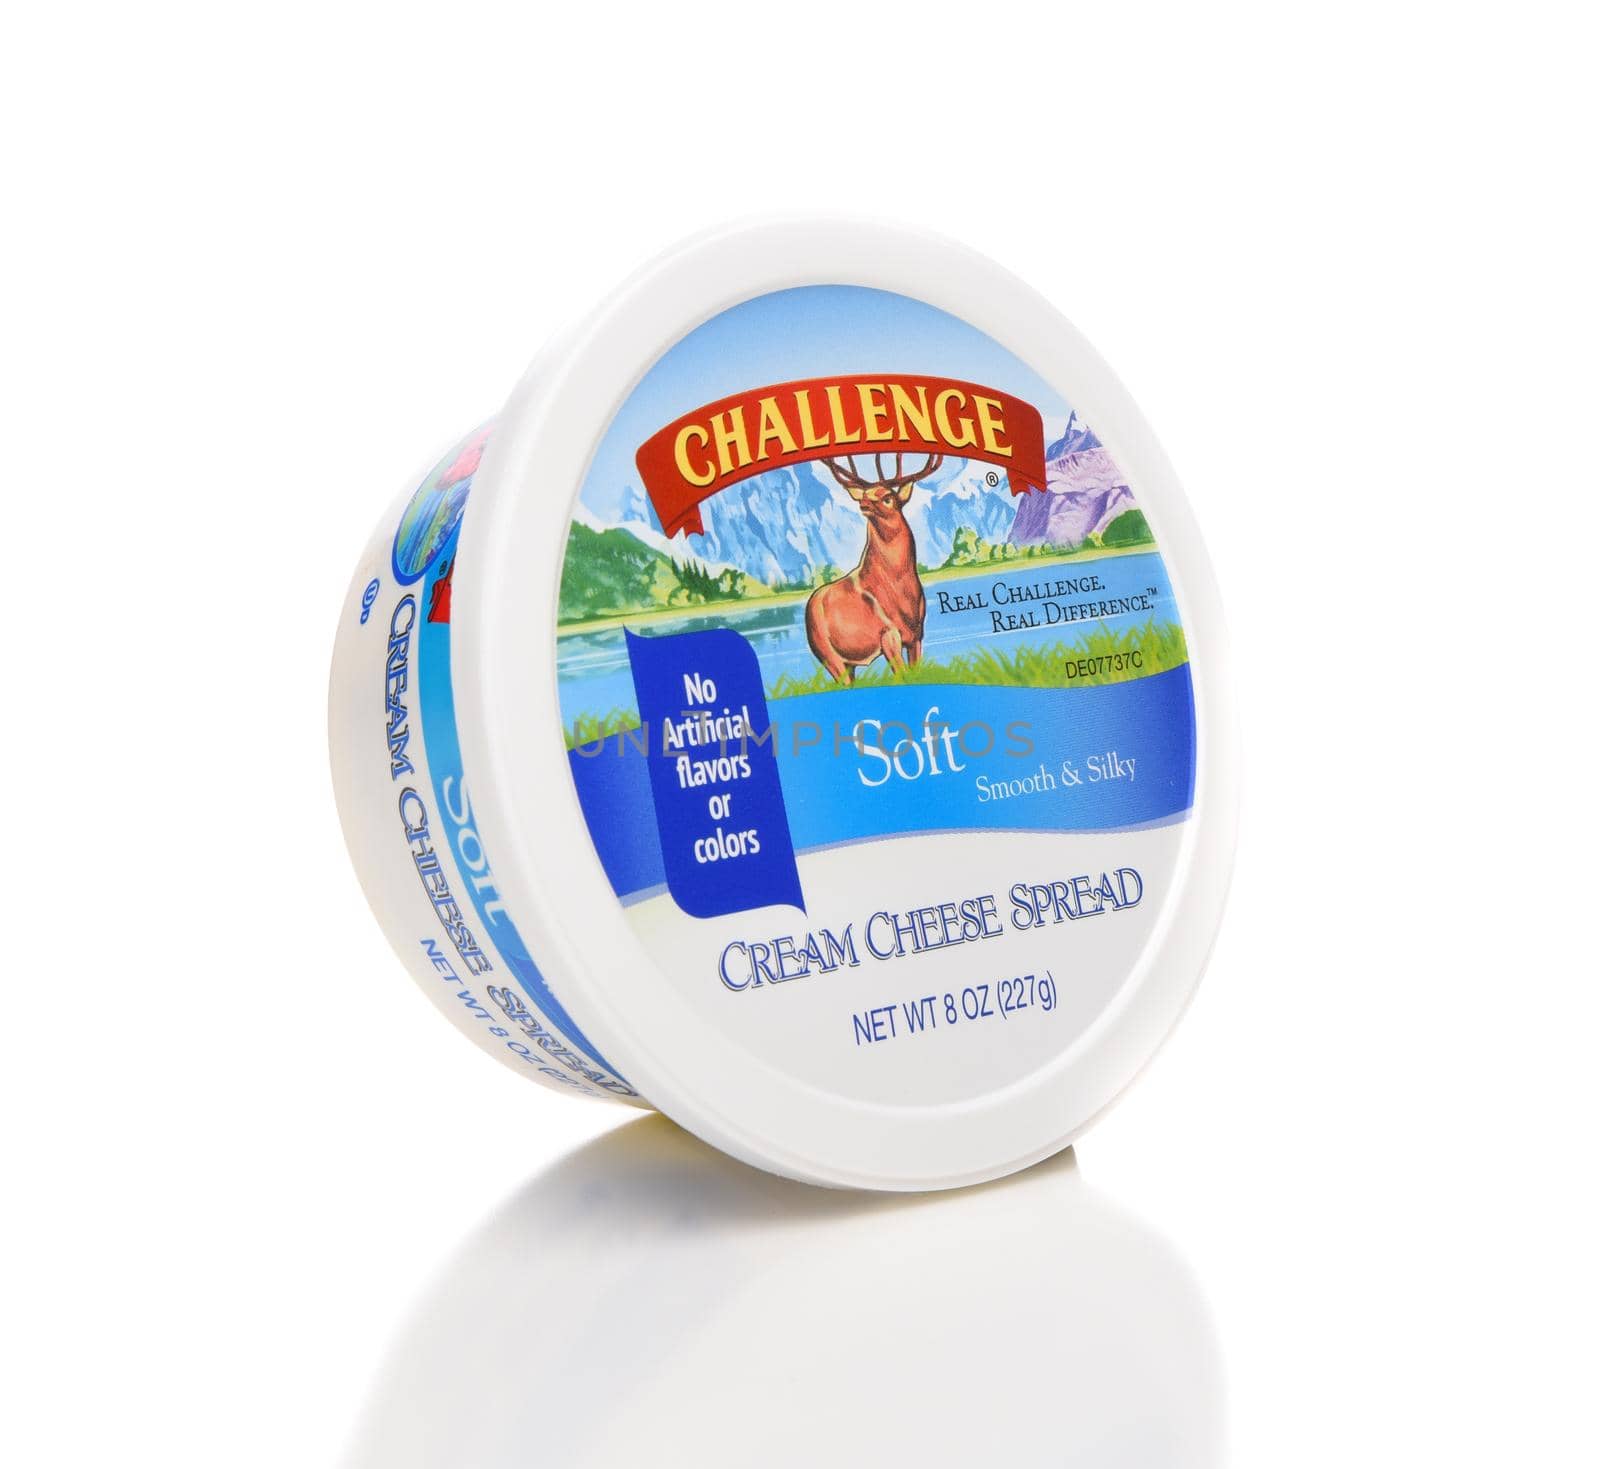  A Container of Challenge Soft Cream Cheese by sCukrov